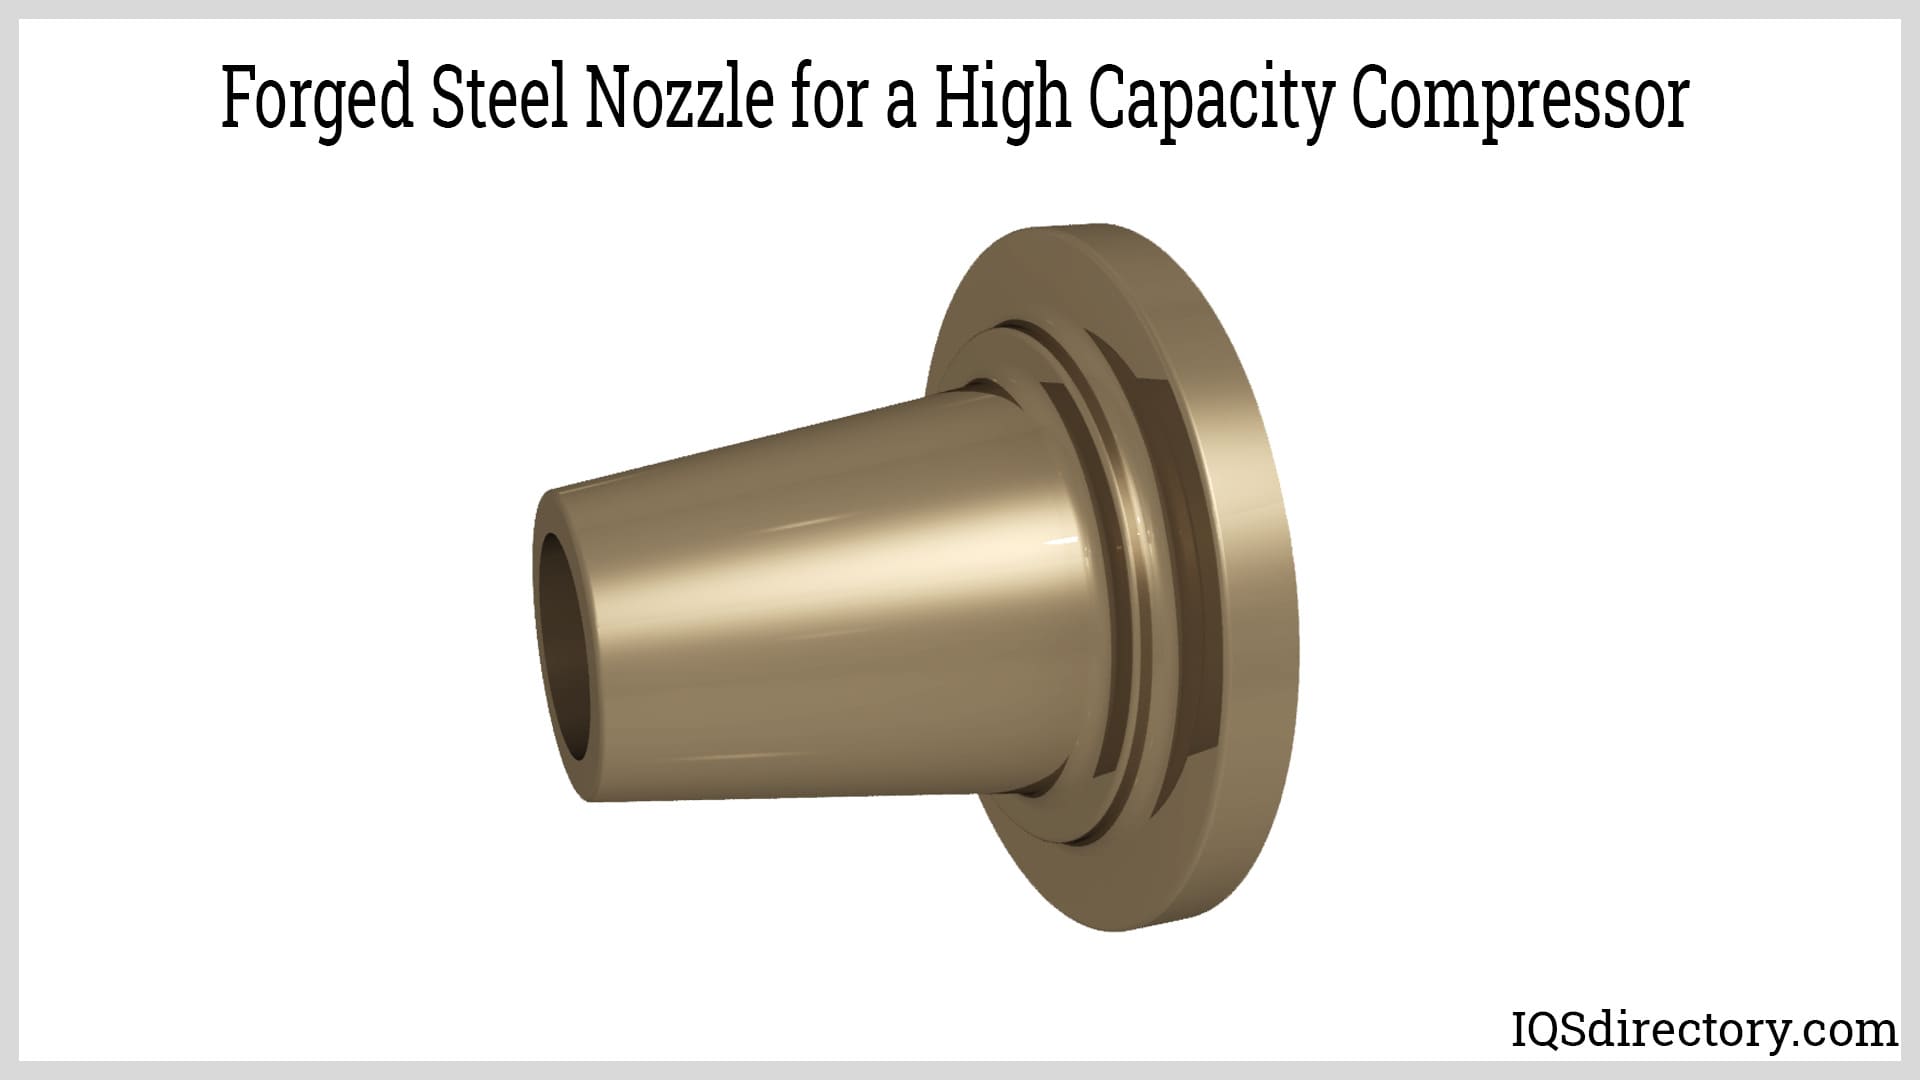 Forged Steel Nozzle for a High Capacity Compressor